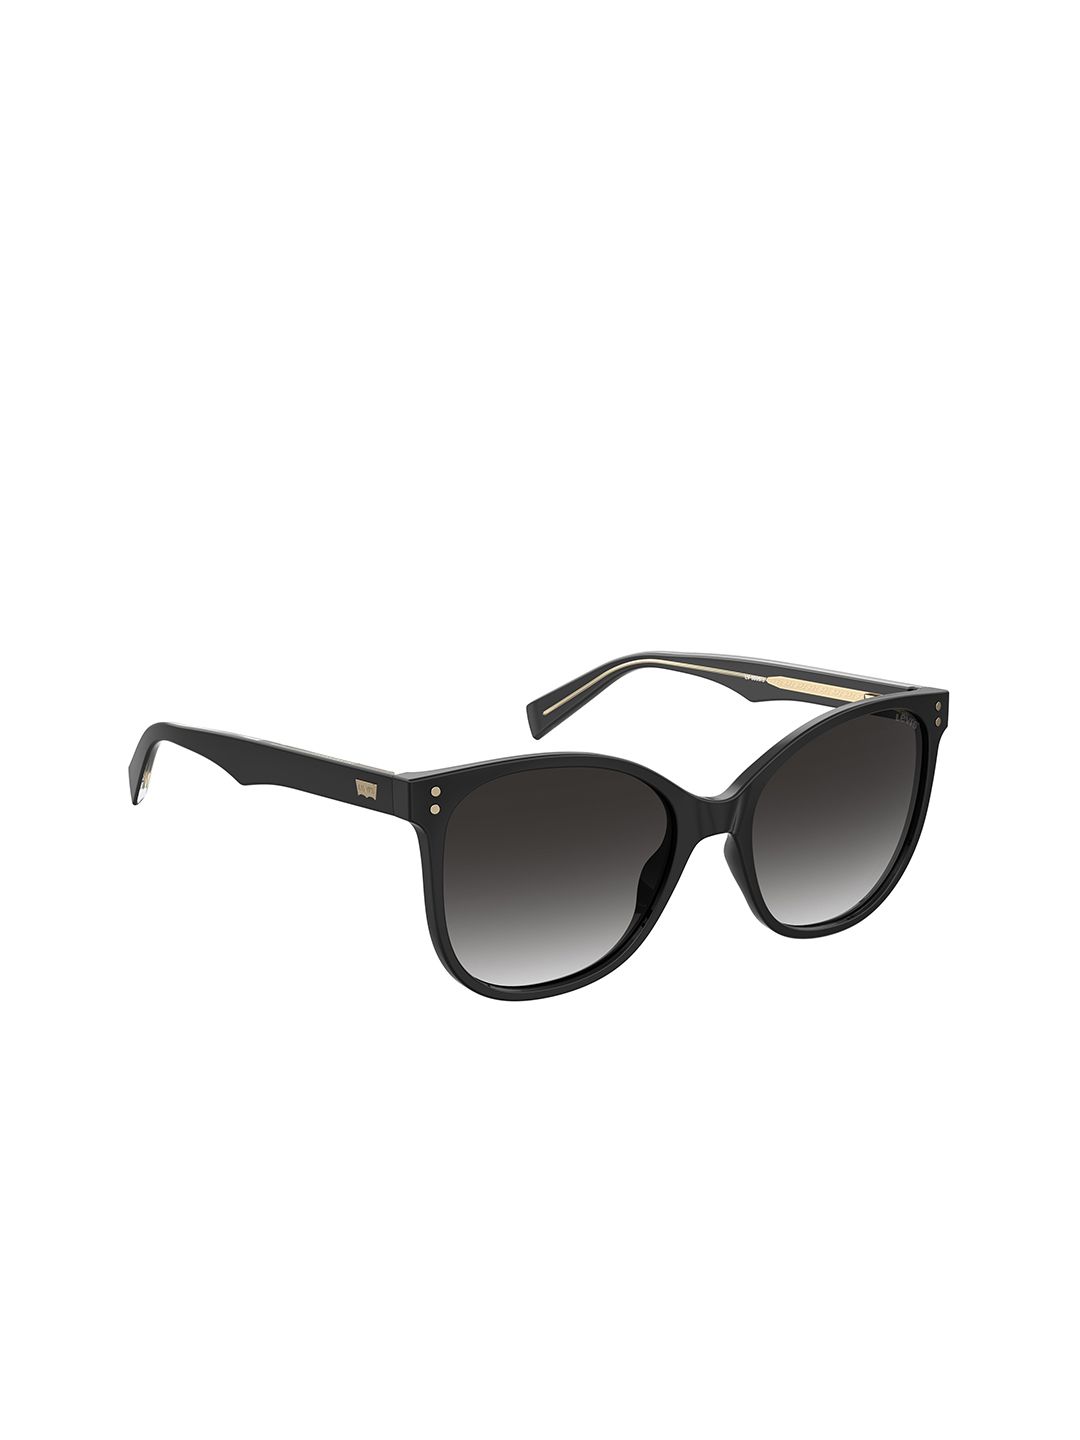 Levis Women Grey Lens & Black Aviator Sunglasses with UV Protected Lens LV 5009/S 807 569O Price in India